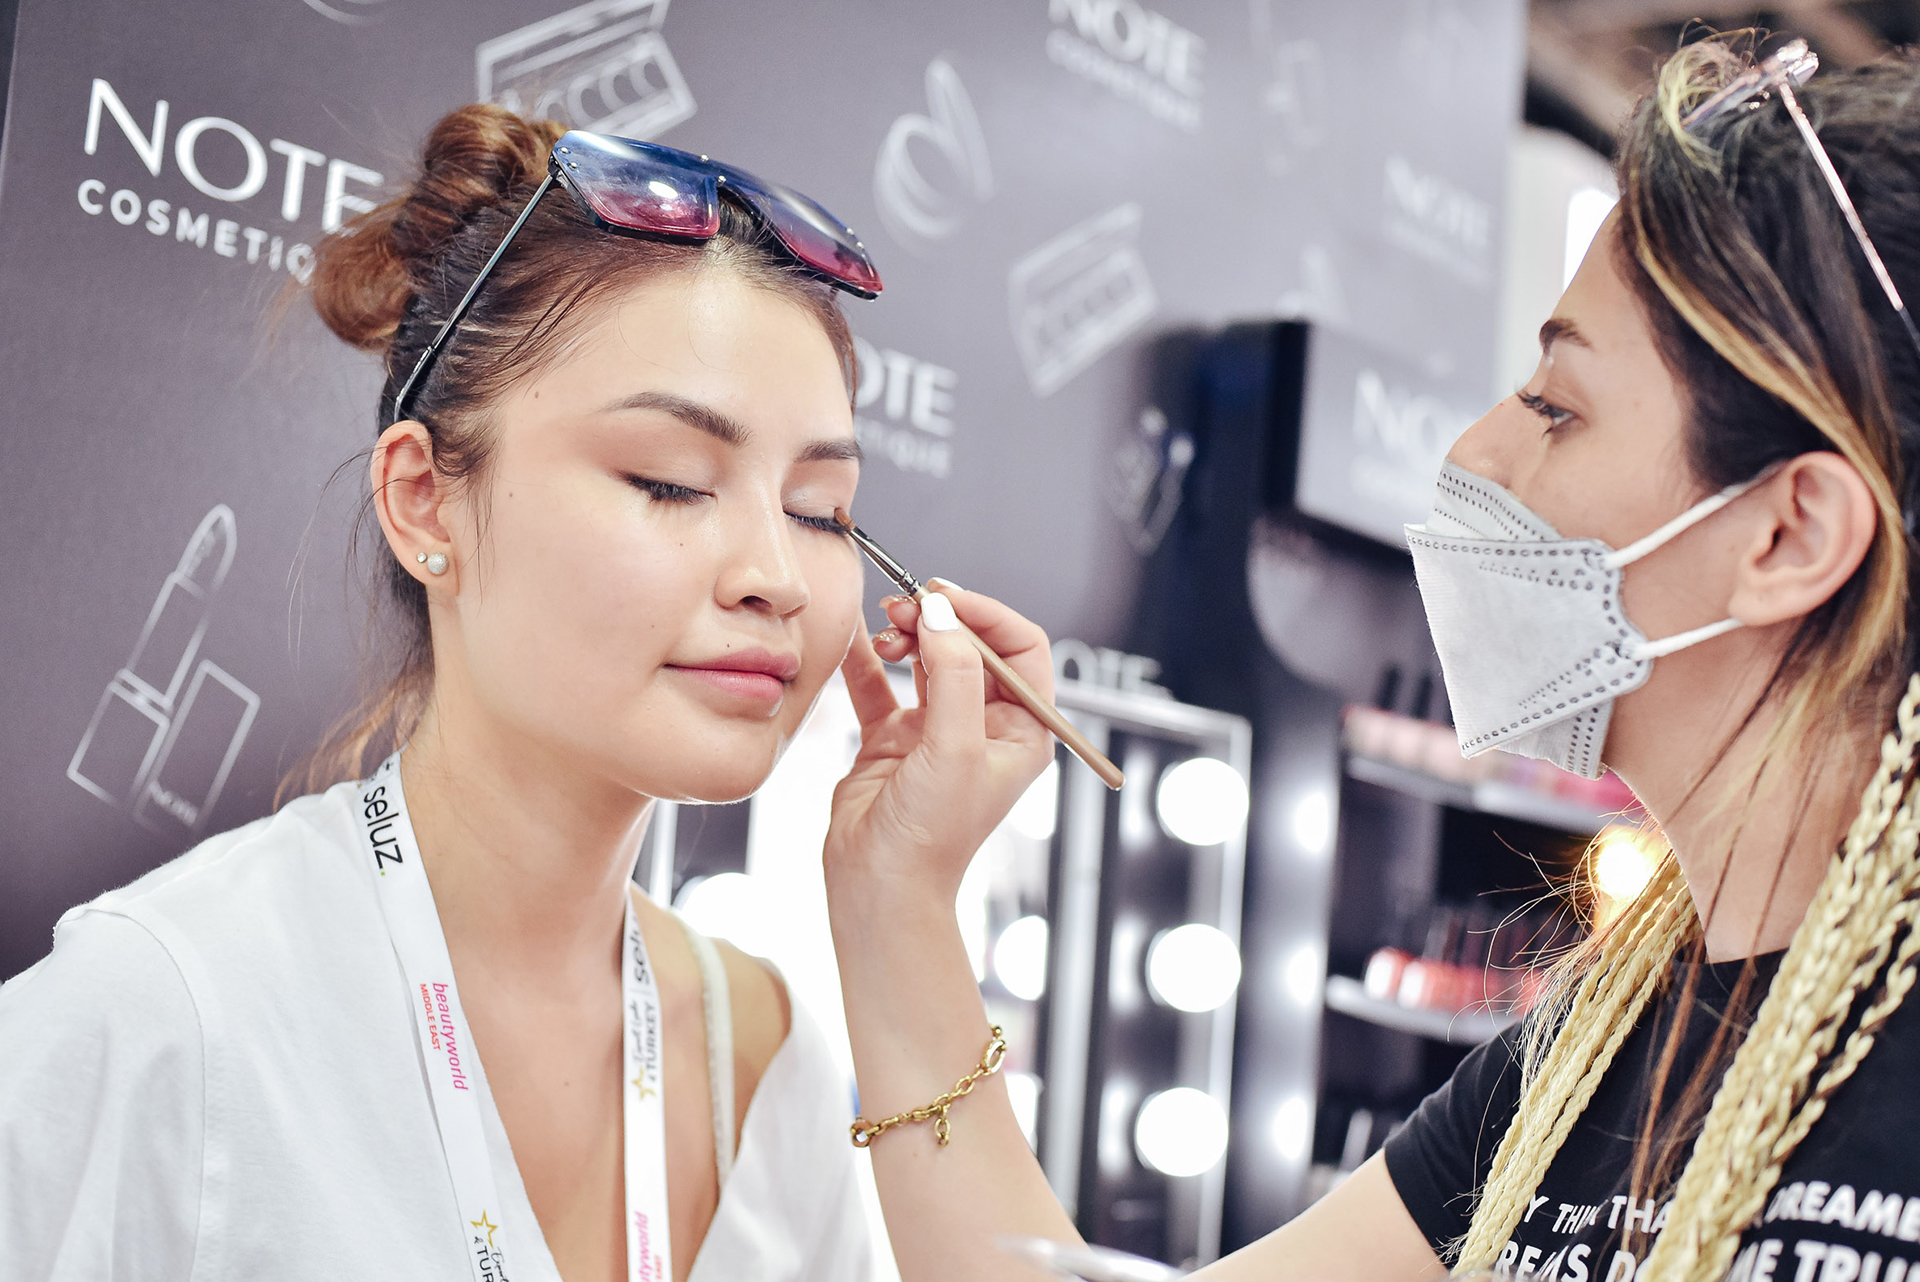 Beautyworld Middle East - Double digit growth for Beautyworld Middle East 2022